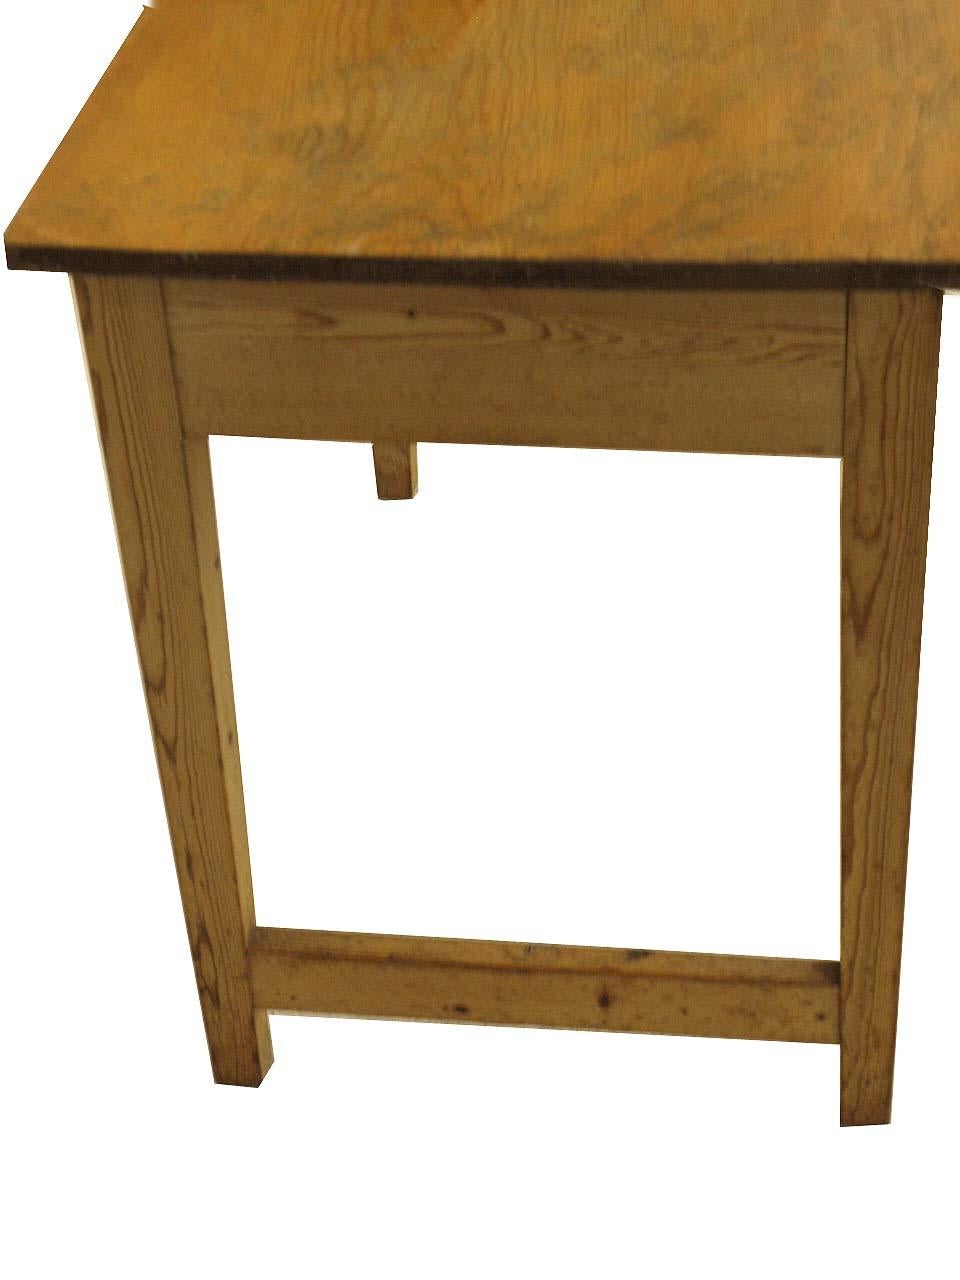 English pine one drawer writing table which was most likely painted originally and stripped and wax finished in the last 30 years. It has a pleasant patina , has 24'' of clearance for seating and a drawer at the end for storage. With stretchers on